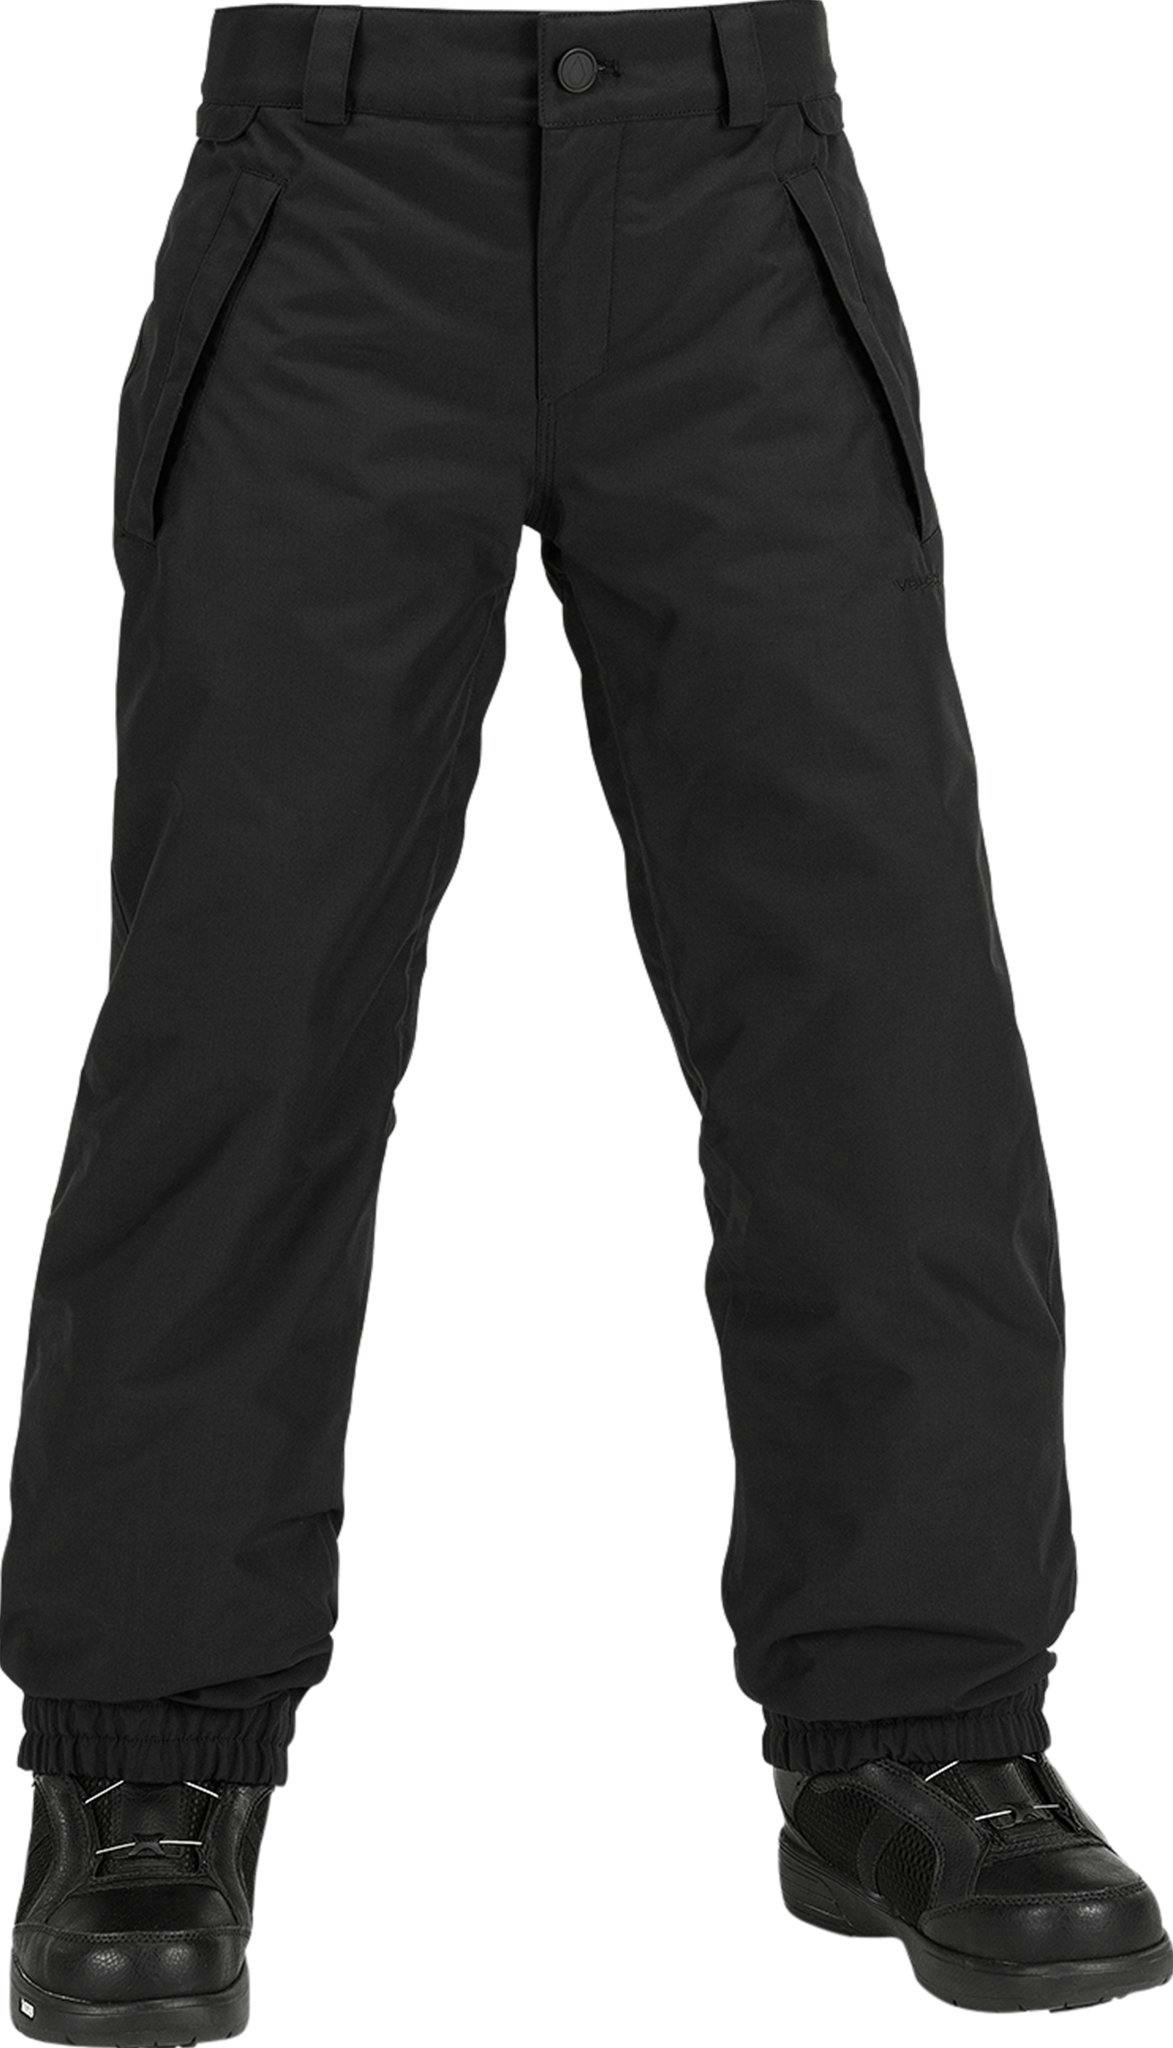 Product image for Fernie Insulated Pant - Youth